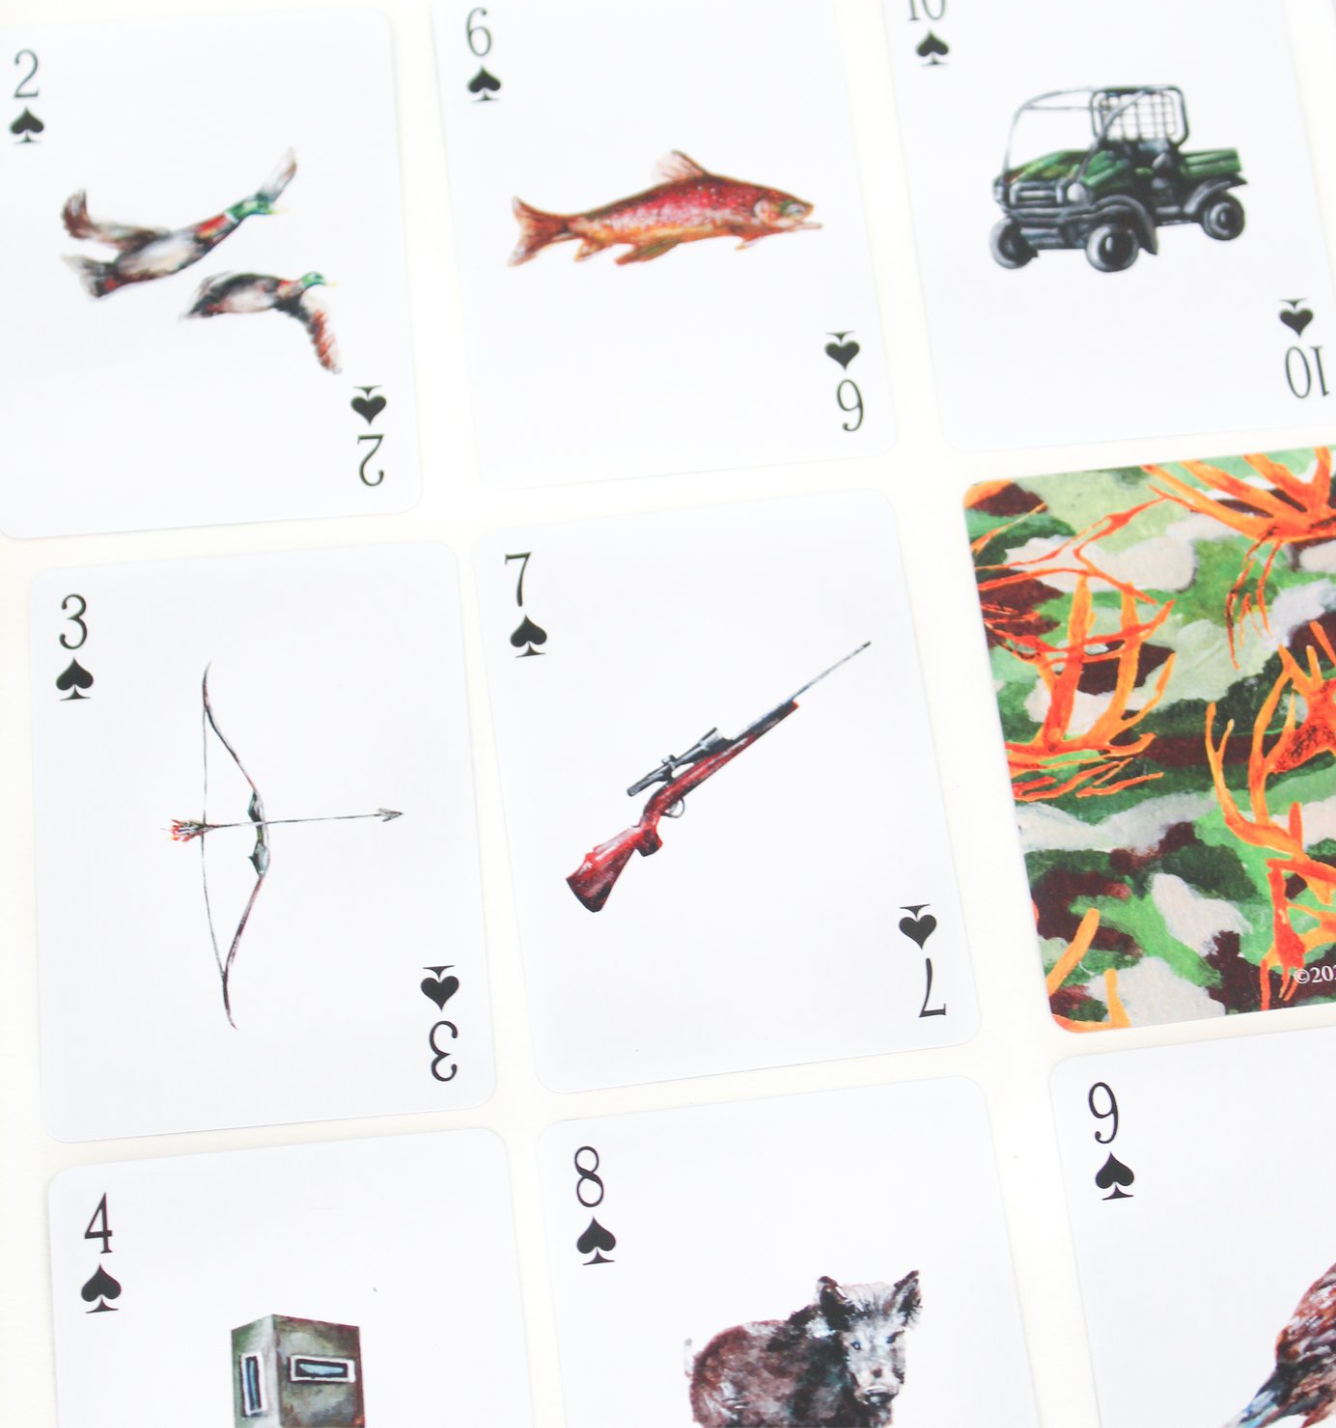 hunting playing cards capturing all your favorite hunting icons